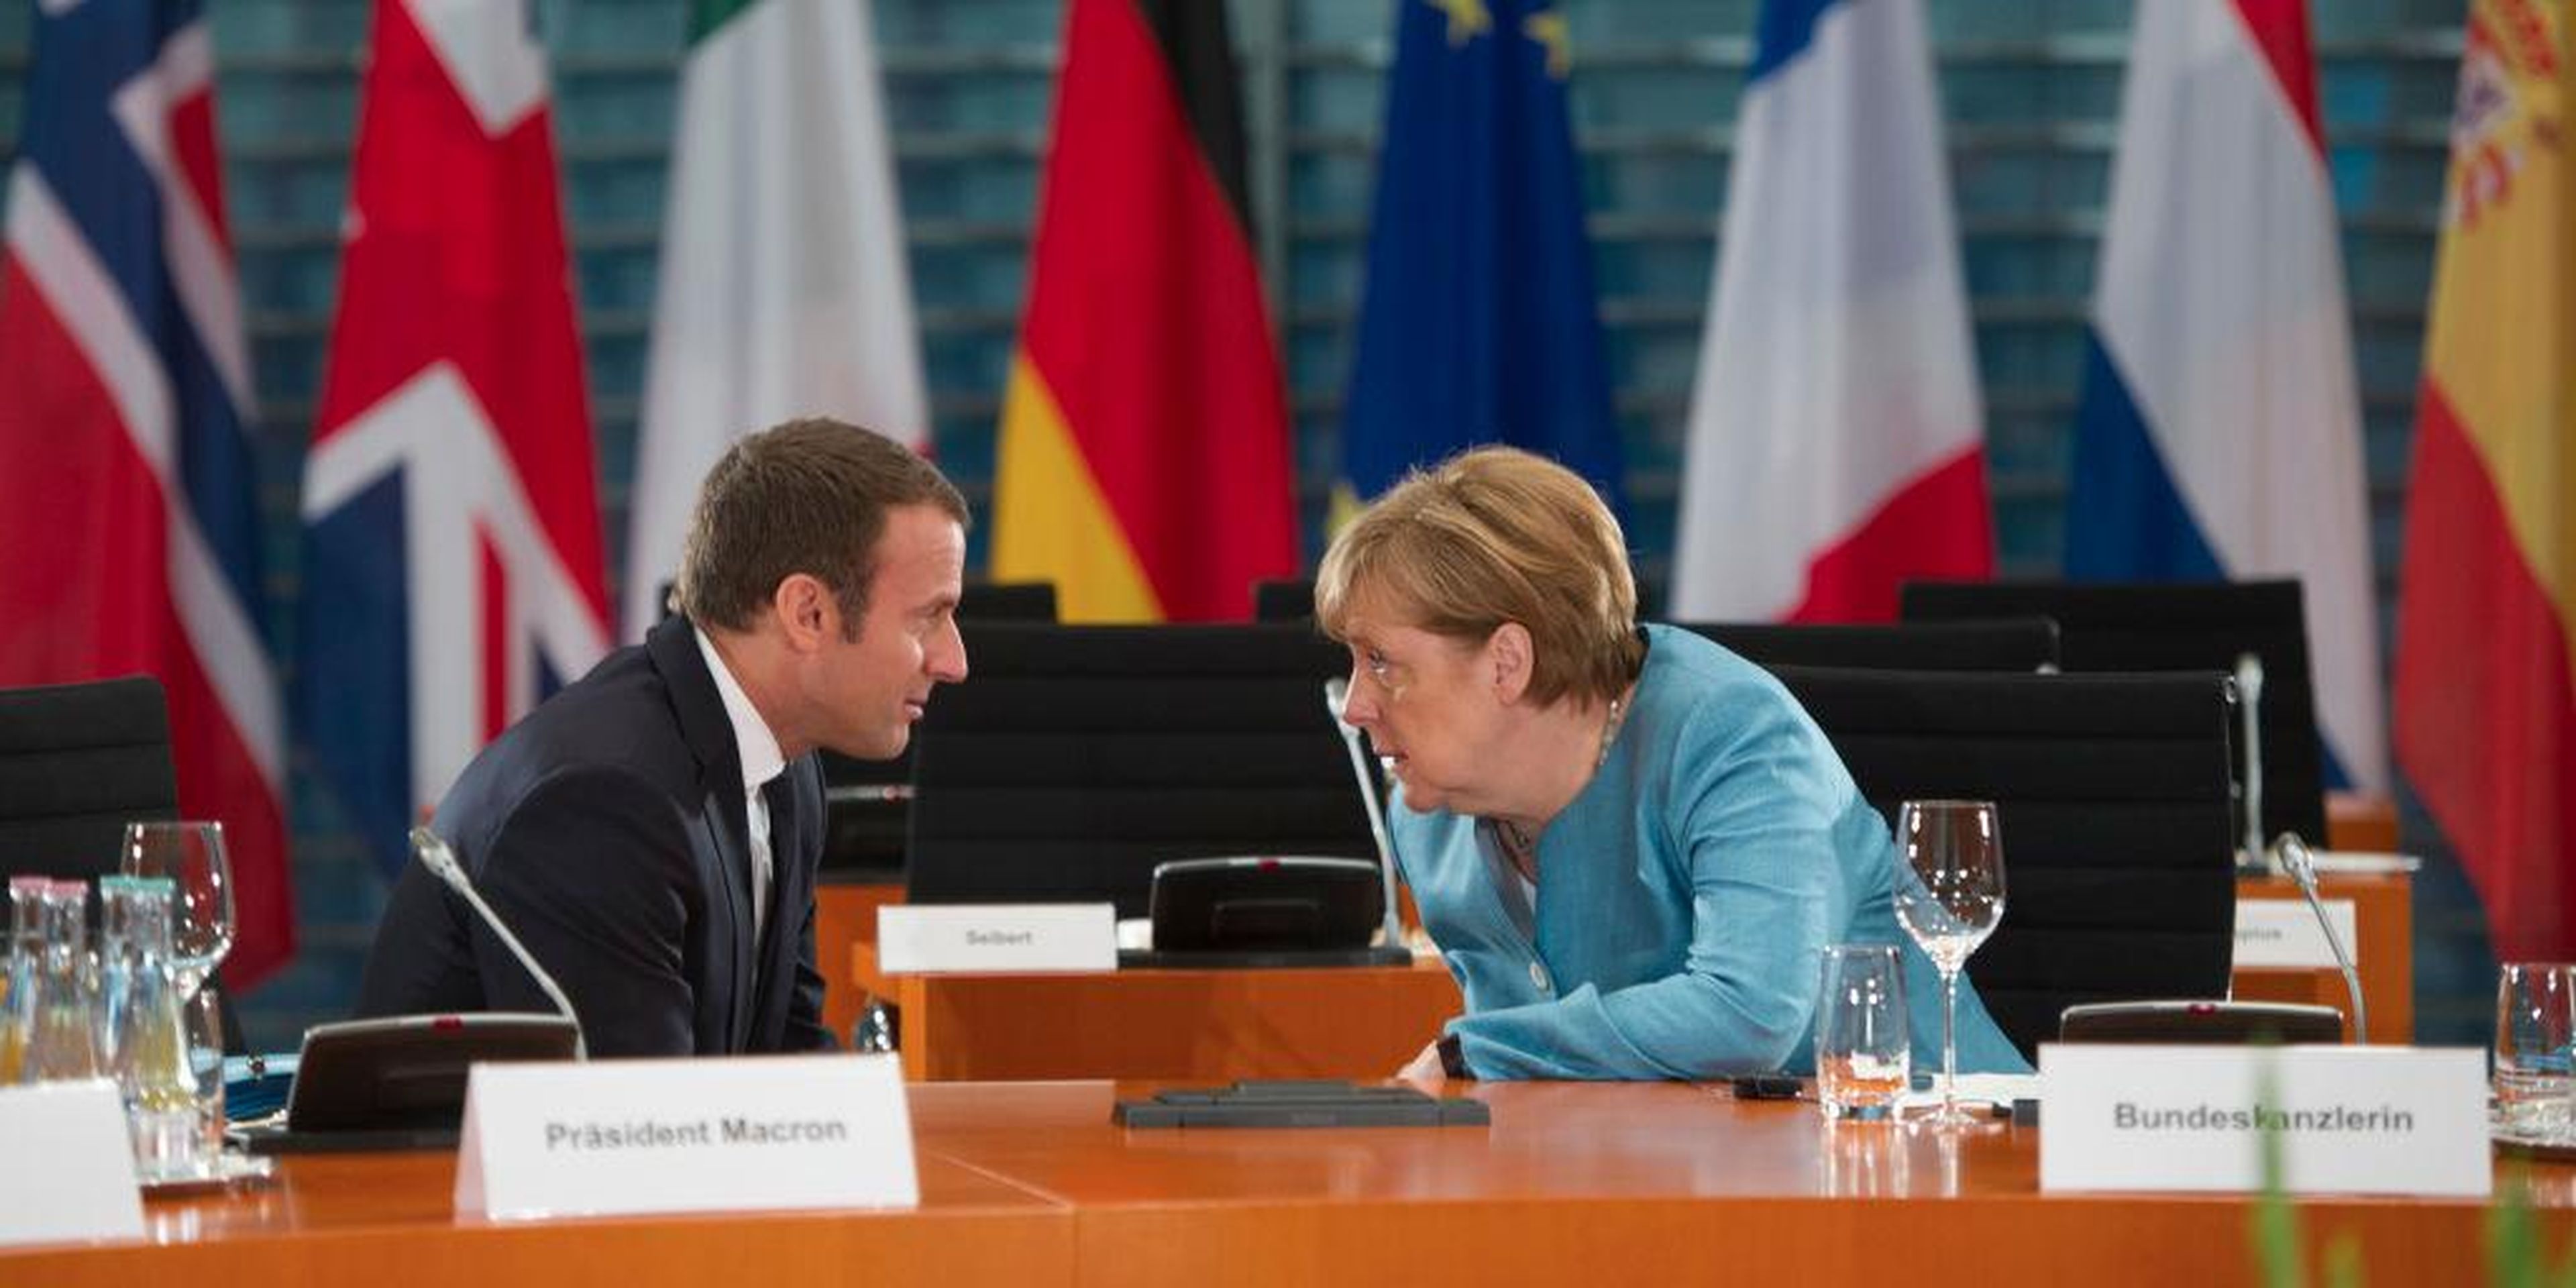 German Chancellor Angela Merkel and French President Emmanuel Macron at a meeting for EU leaders in Berlin i June 2017. Germany and France have been concerned with China's economic policies with the EU.